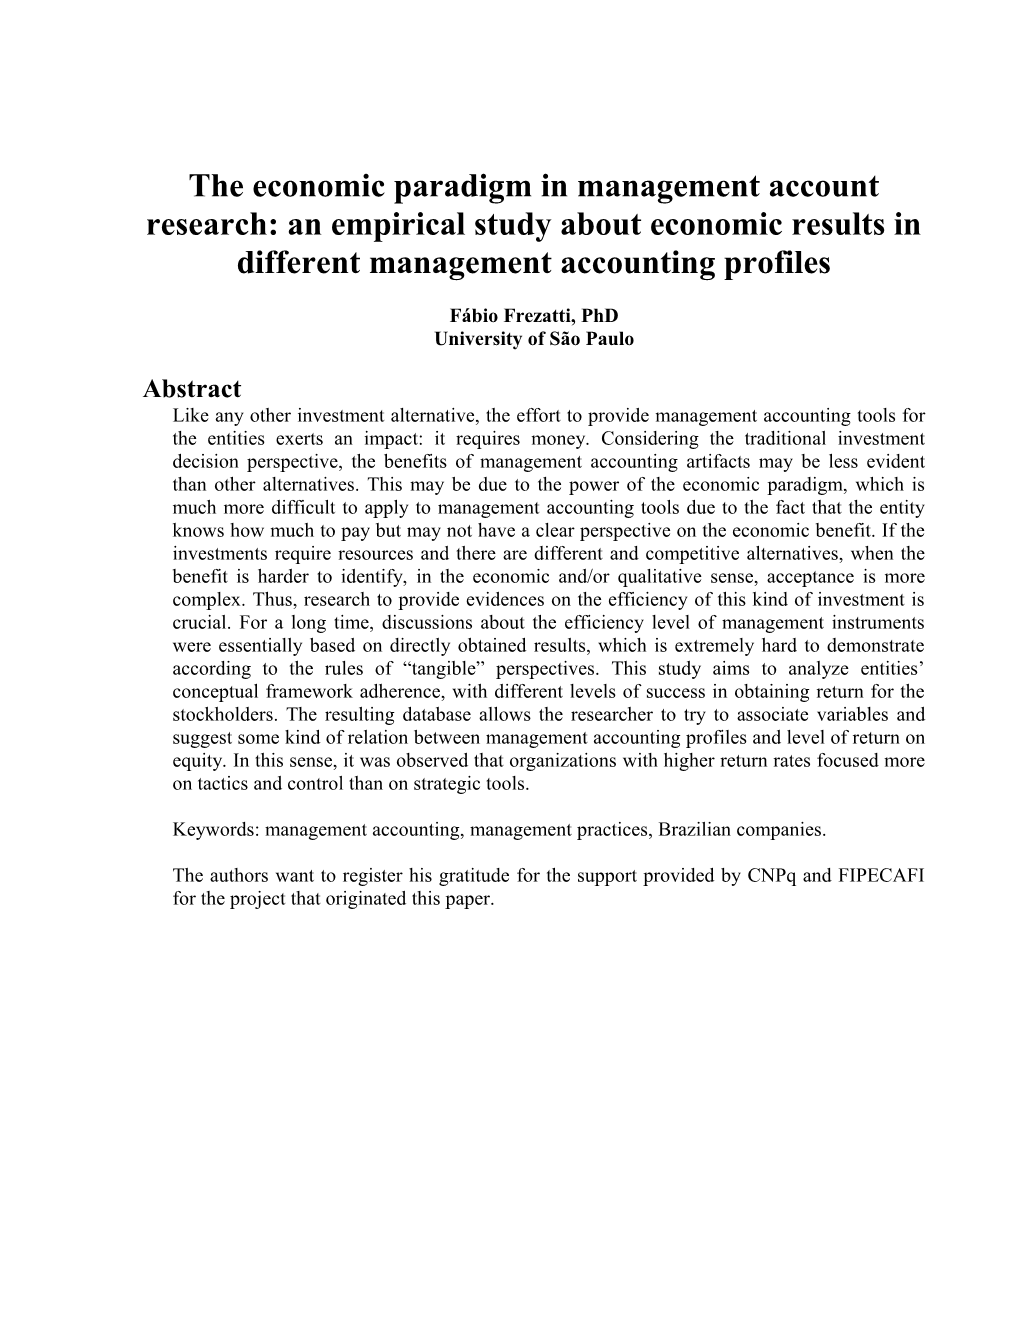 The Economic Paradigm in Management Account Research: an Empirical Study About Economic